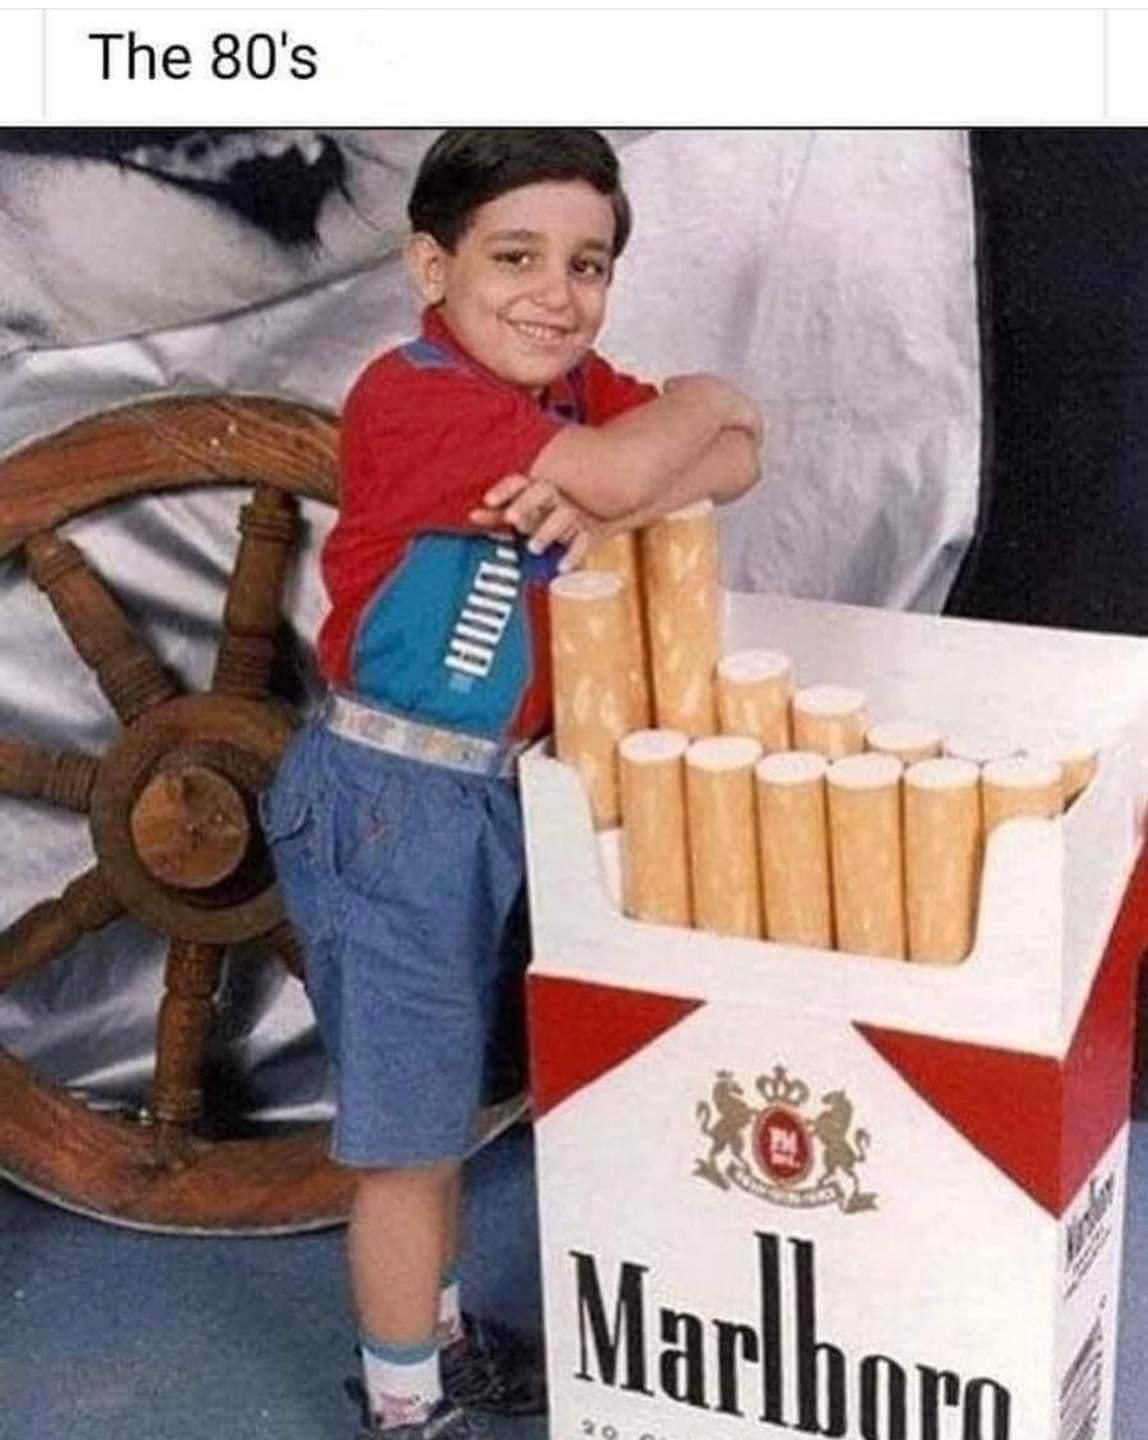 Only in the 80’s would you hear a father say, “Hey son, let’s get a picture of you standing with that big pack of cigarettes.”